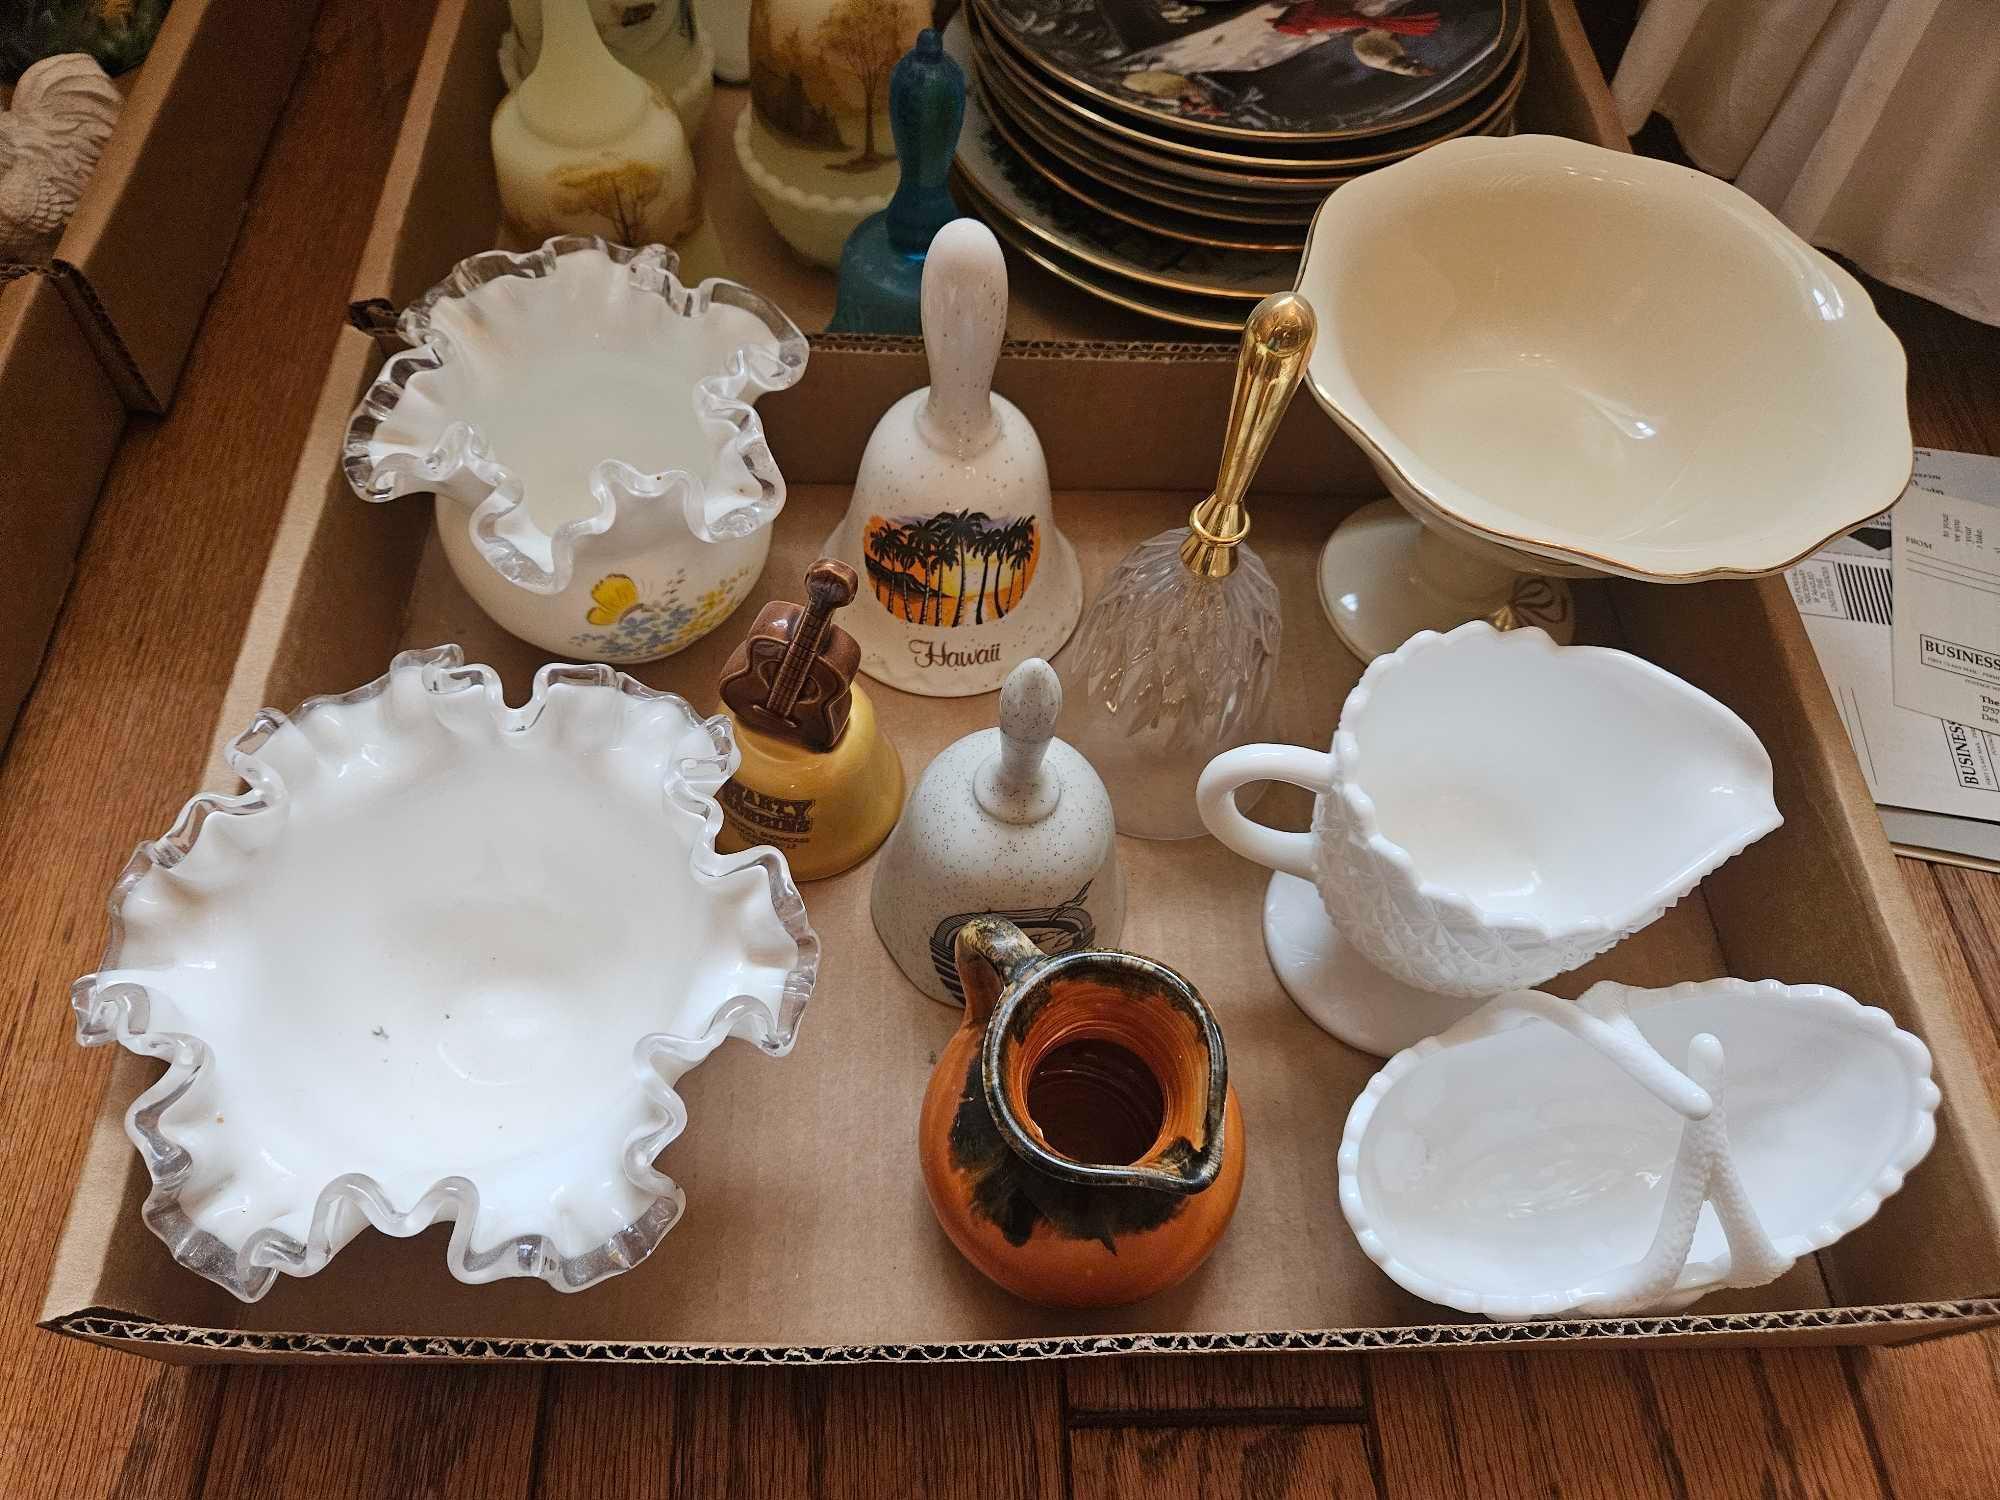 Collector Plates, Fenton Glassware, Bells and more.